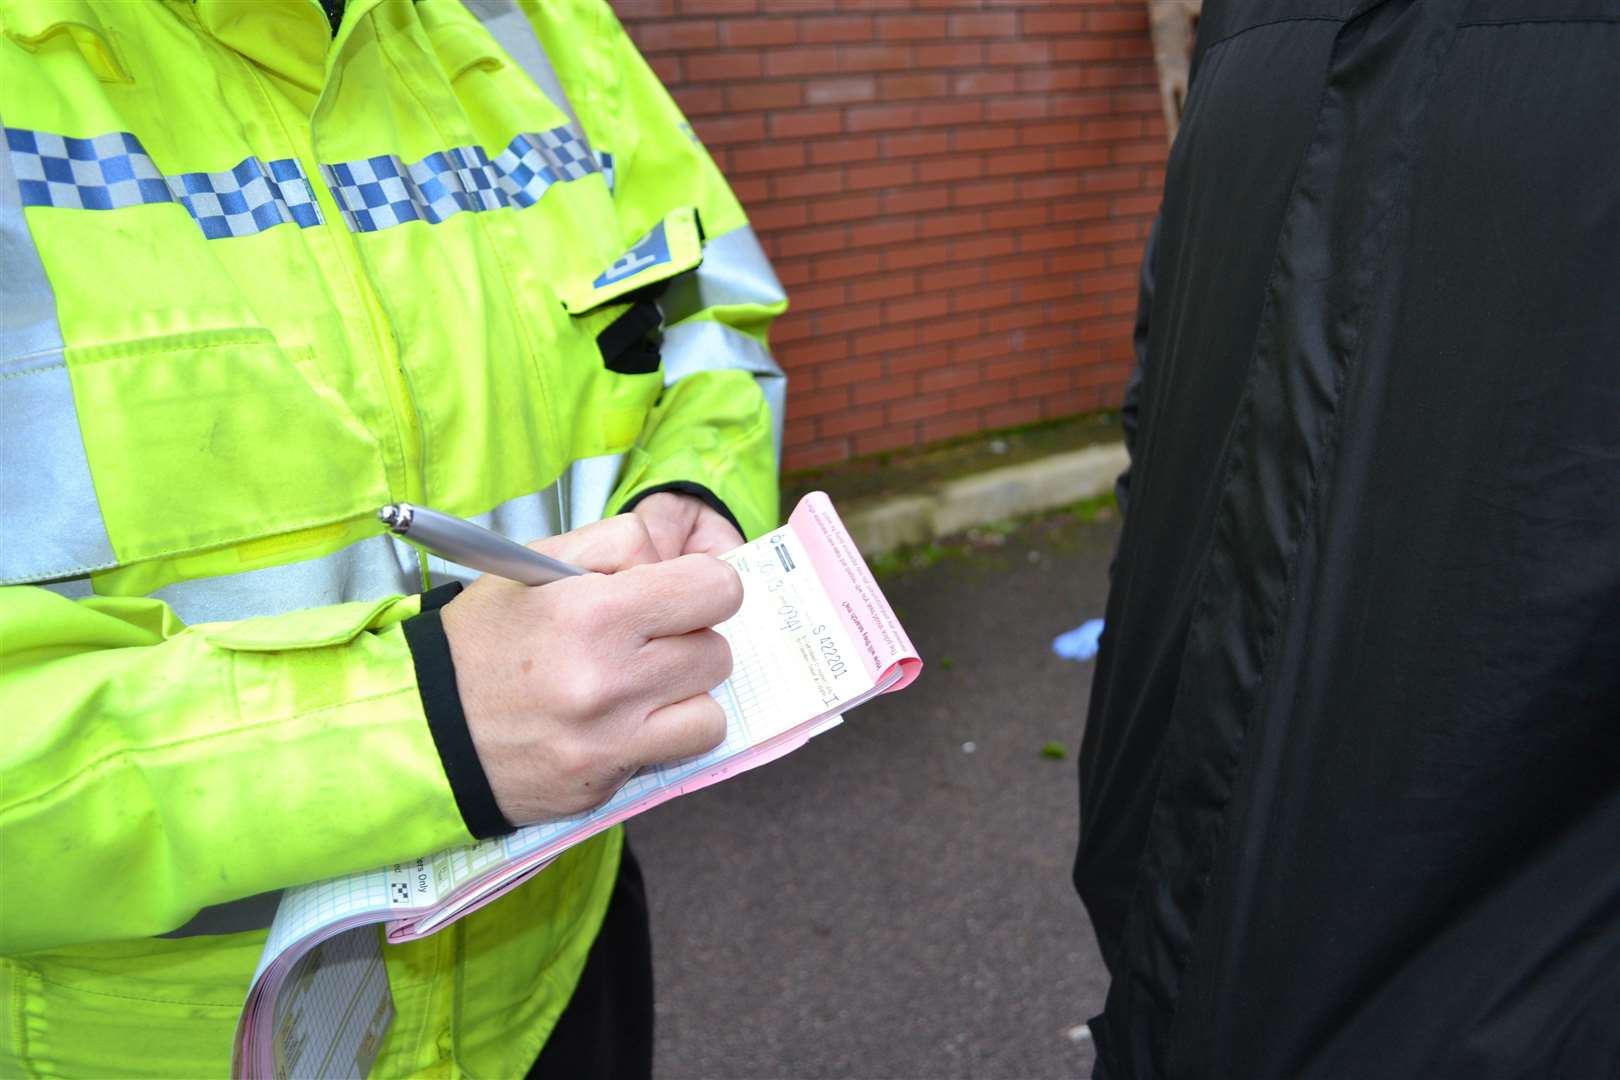 Black people are six times more likely than white people to be stopped and searched in Kent